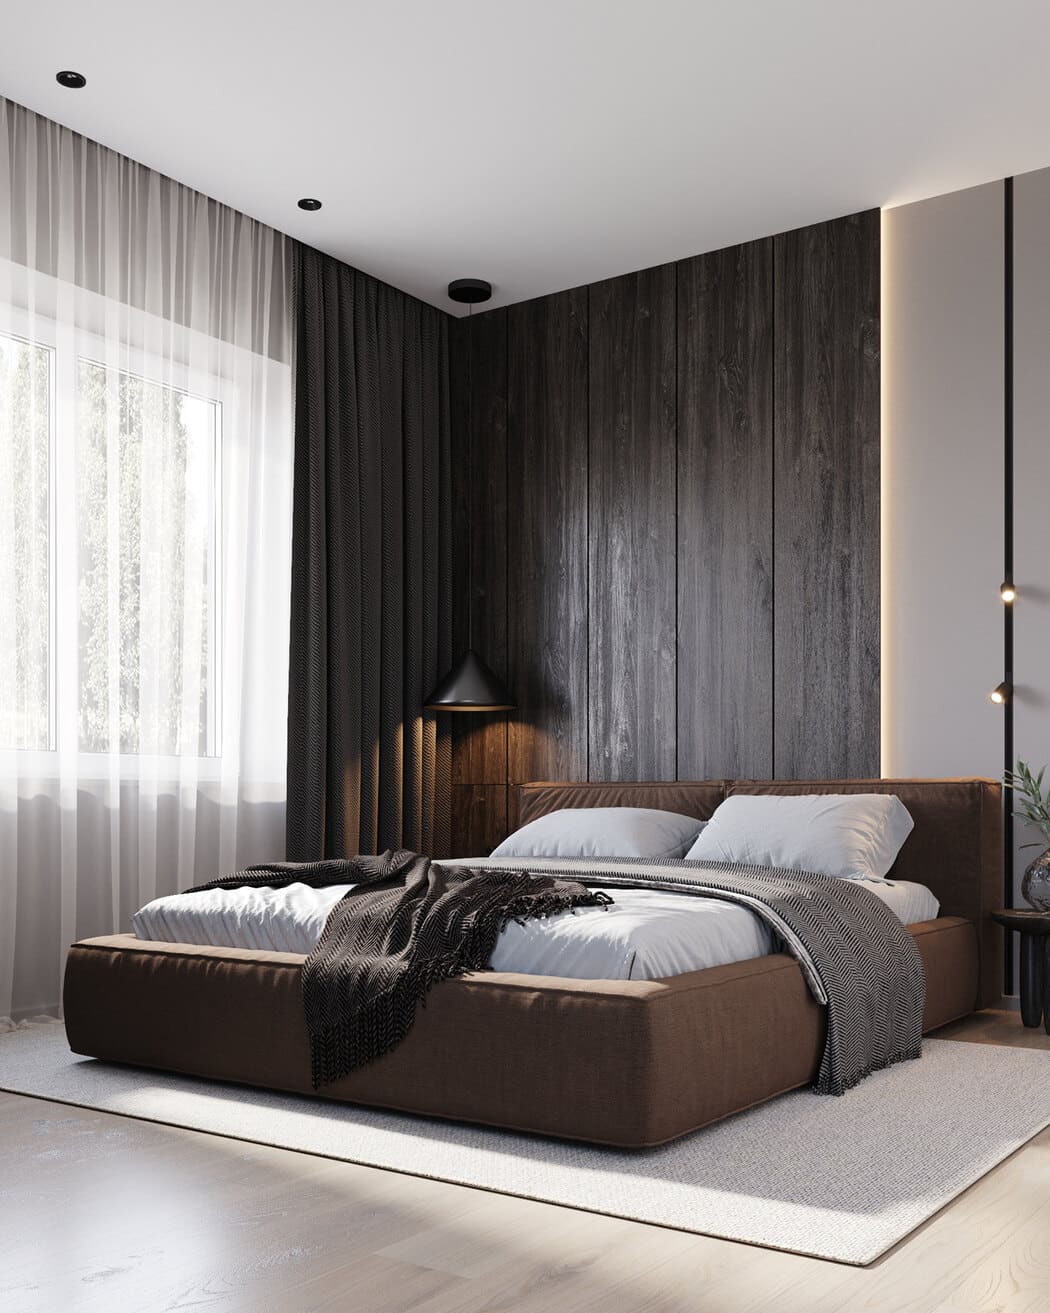 Aesthetic apartment for a young family, bedroom, photo 19